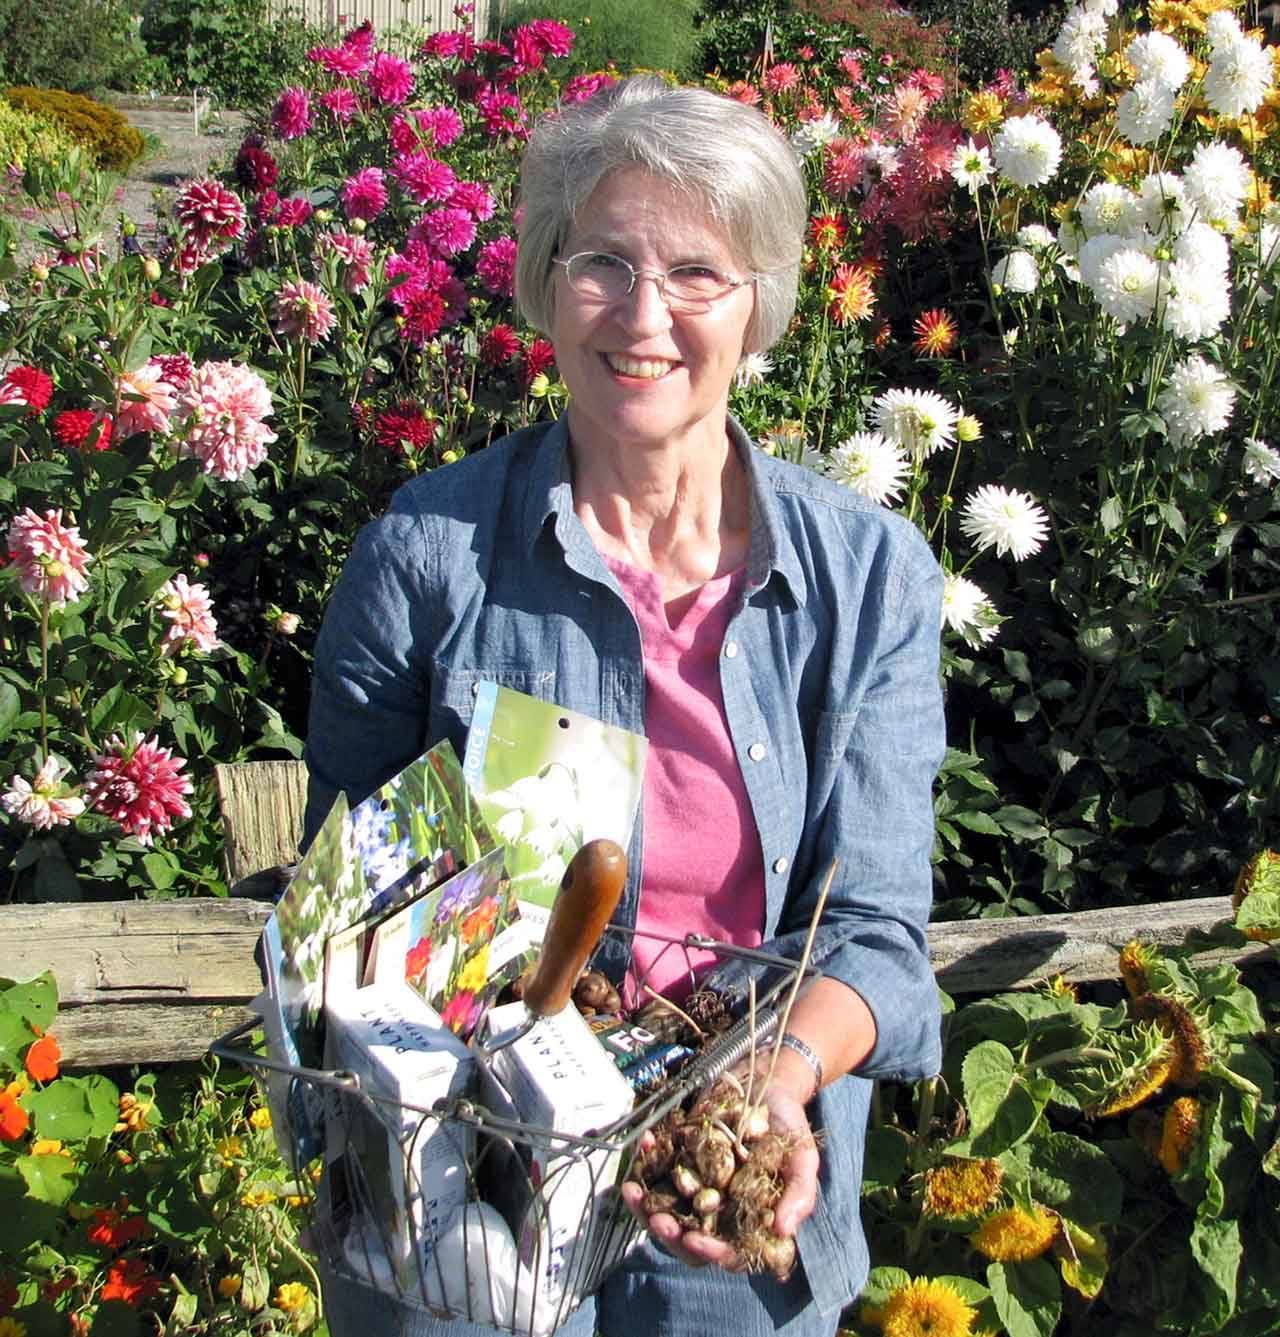 Master Gardener Jan Danford will discuss how to select and plant healthy spring garden bulbs at a Port Angeles presentation at noon Thursday.